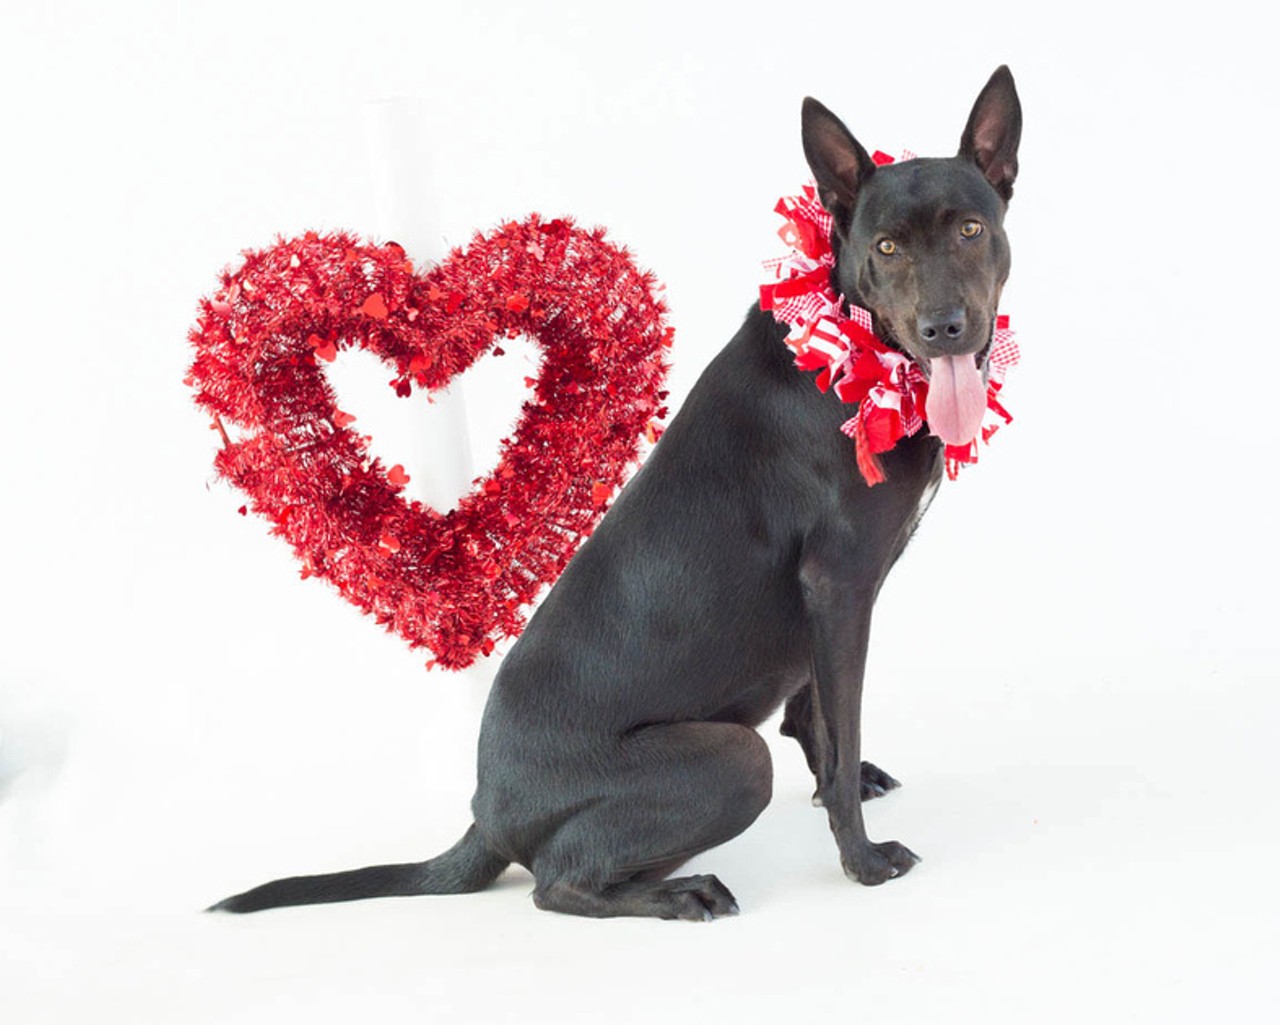 25 adoptable dogs at Orange County Animal Services who would totally cuddle with you on Valentine's Day